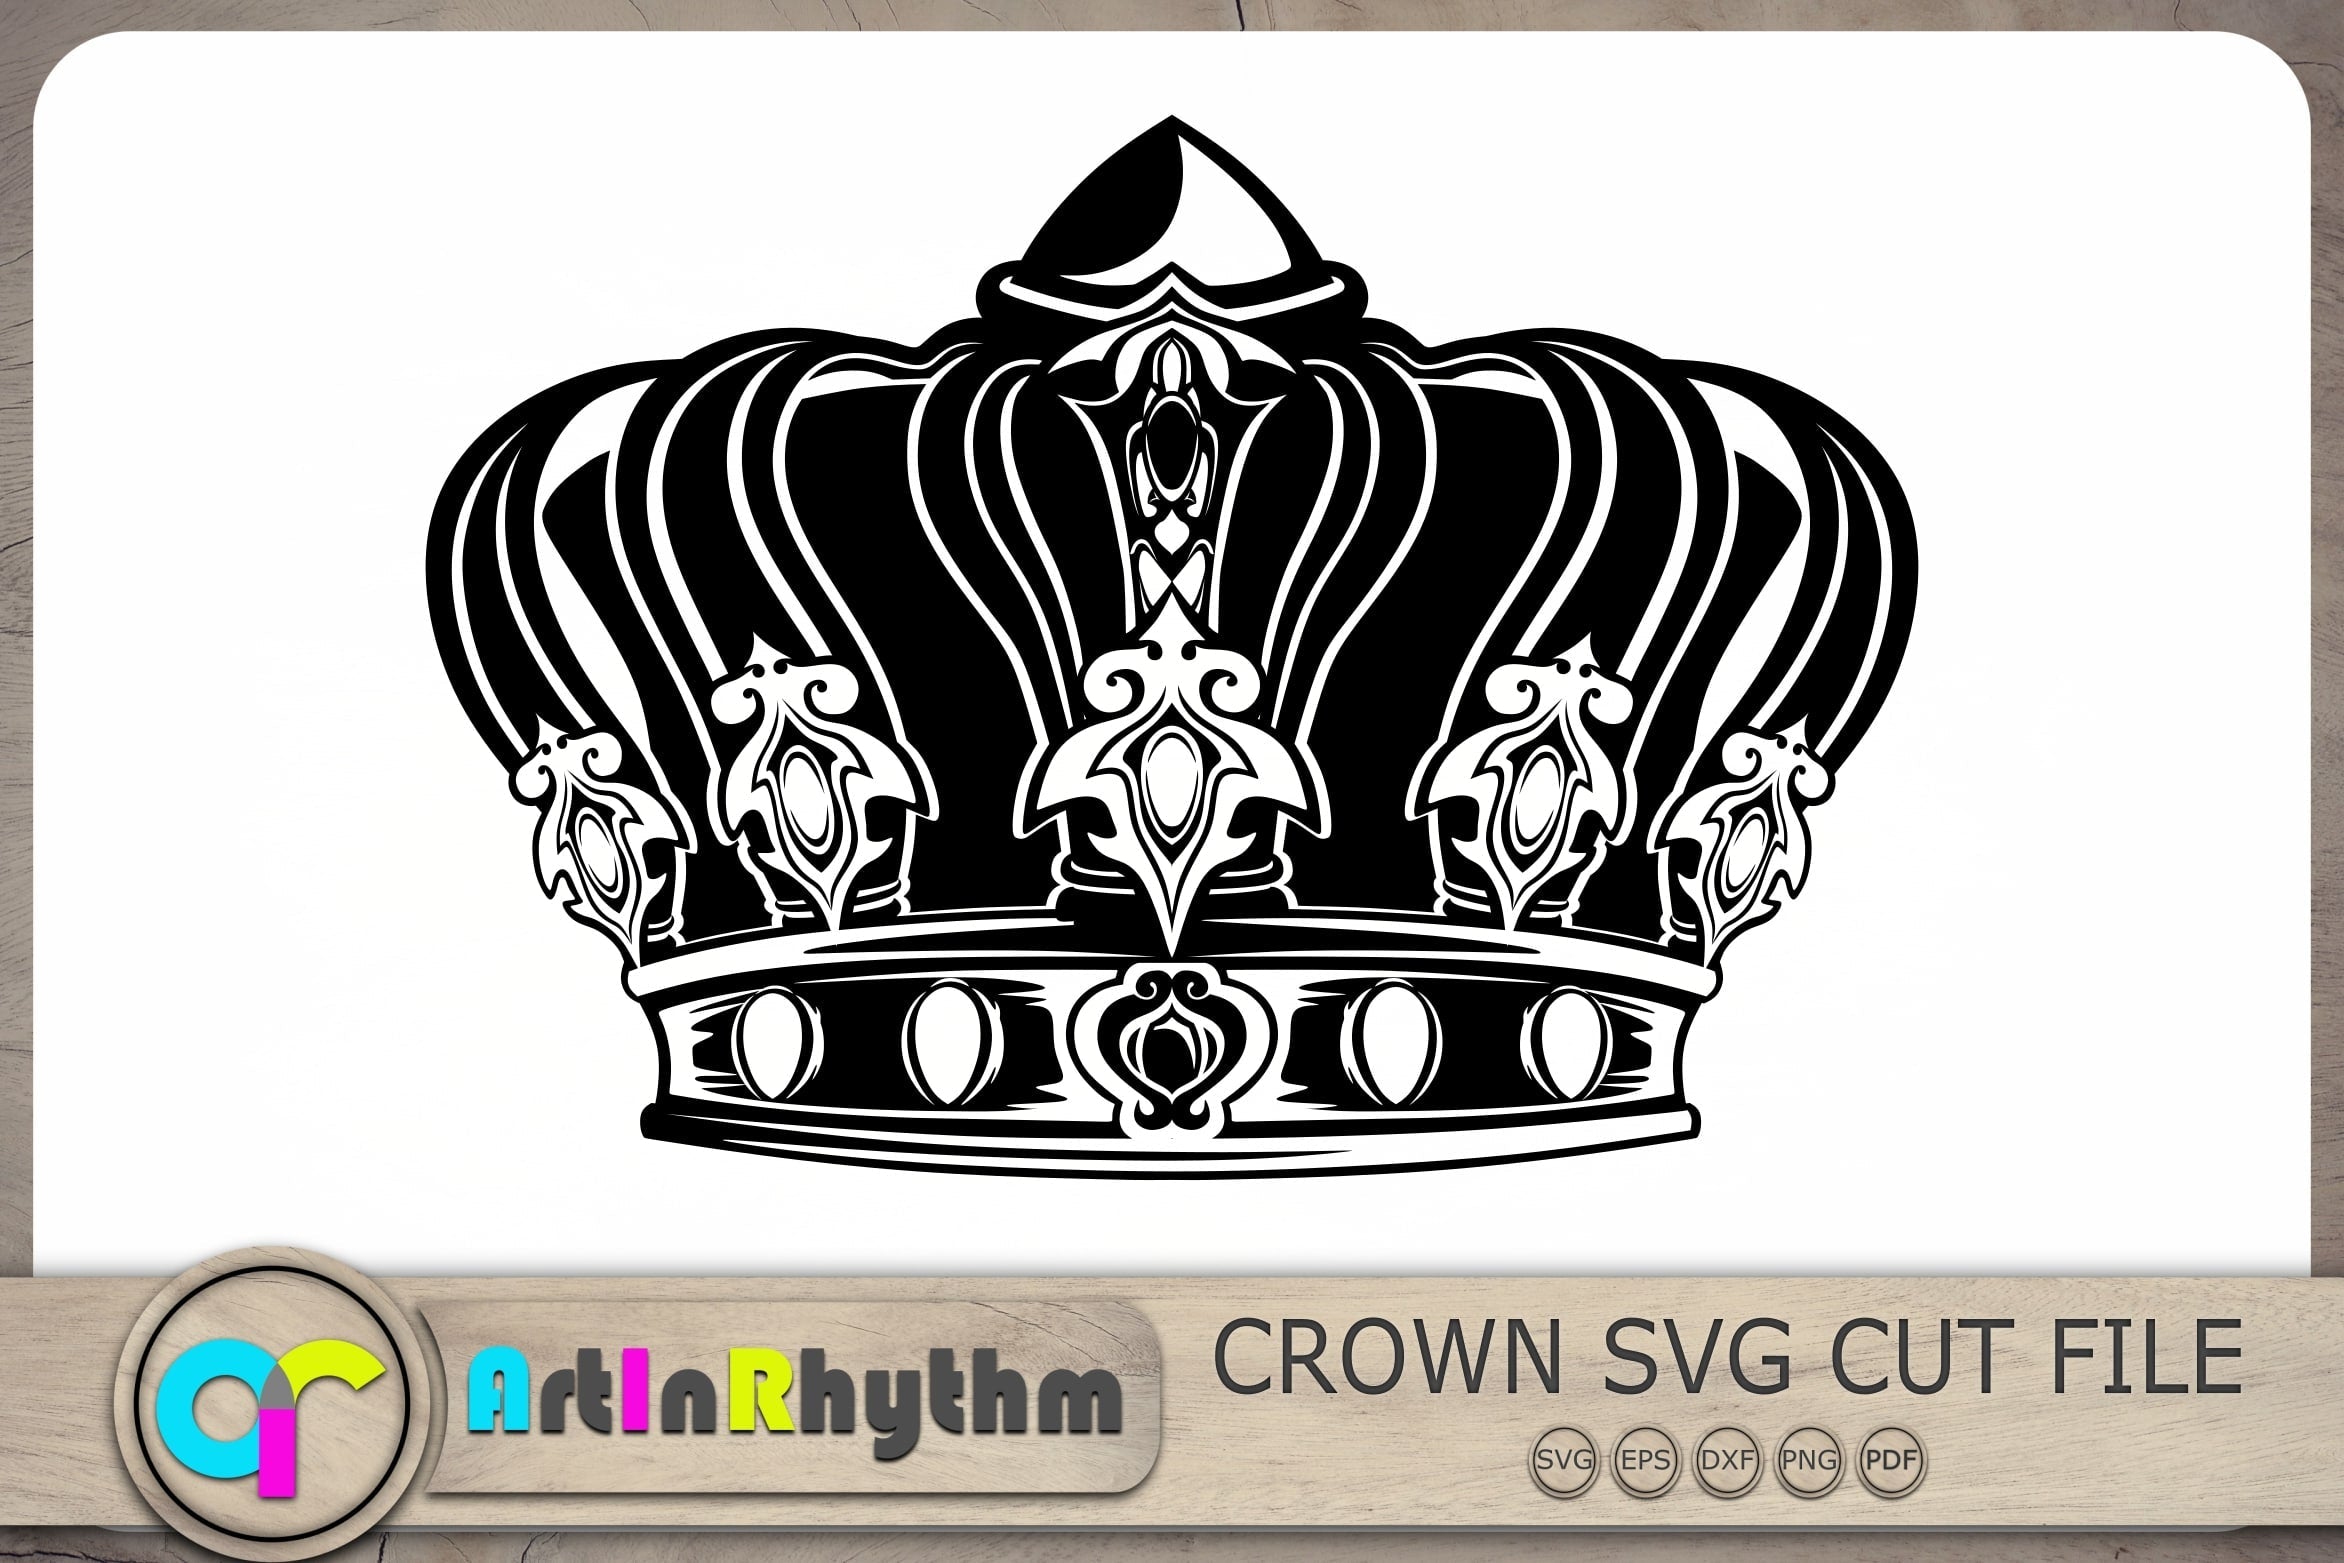 King SVG, Queen SVG , King crown, Queen Crown, svg Design, svg png dxf eps  for silhouette, cricut machines, King Queen SVG